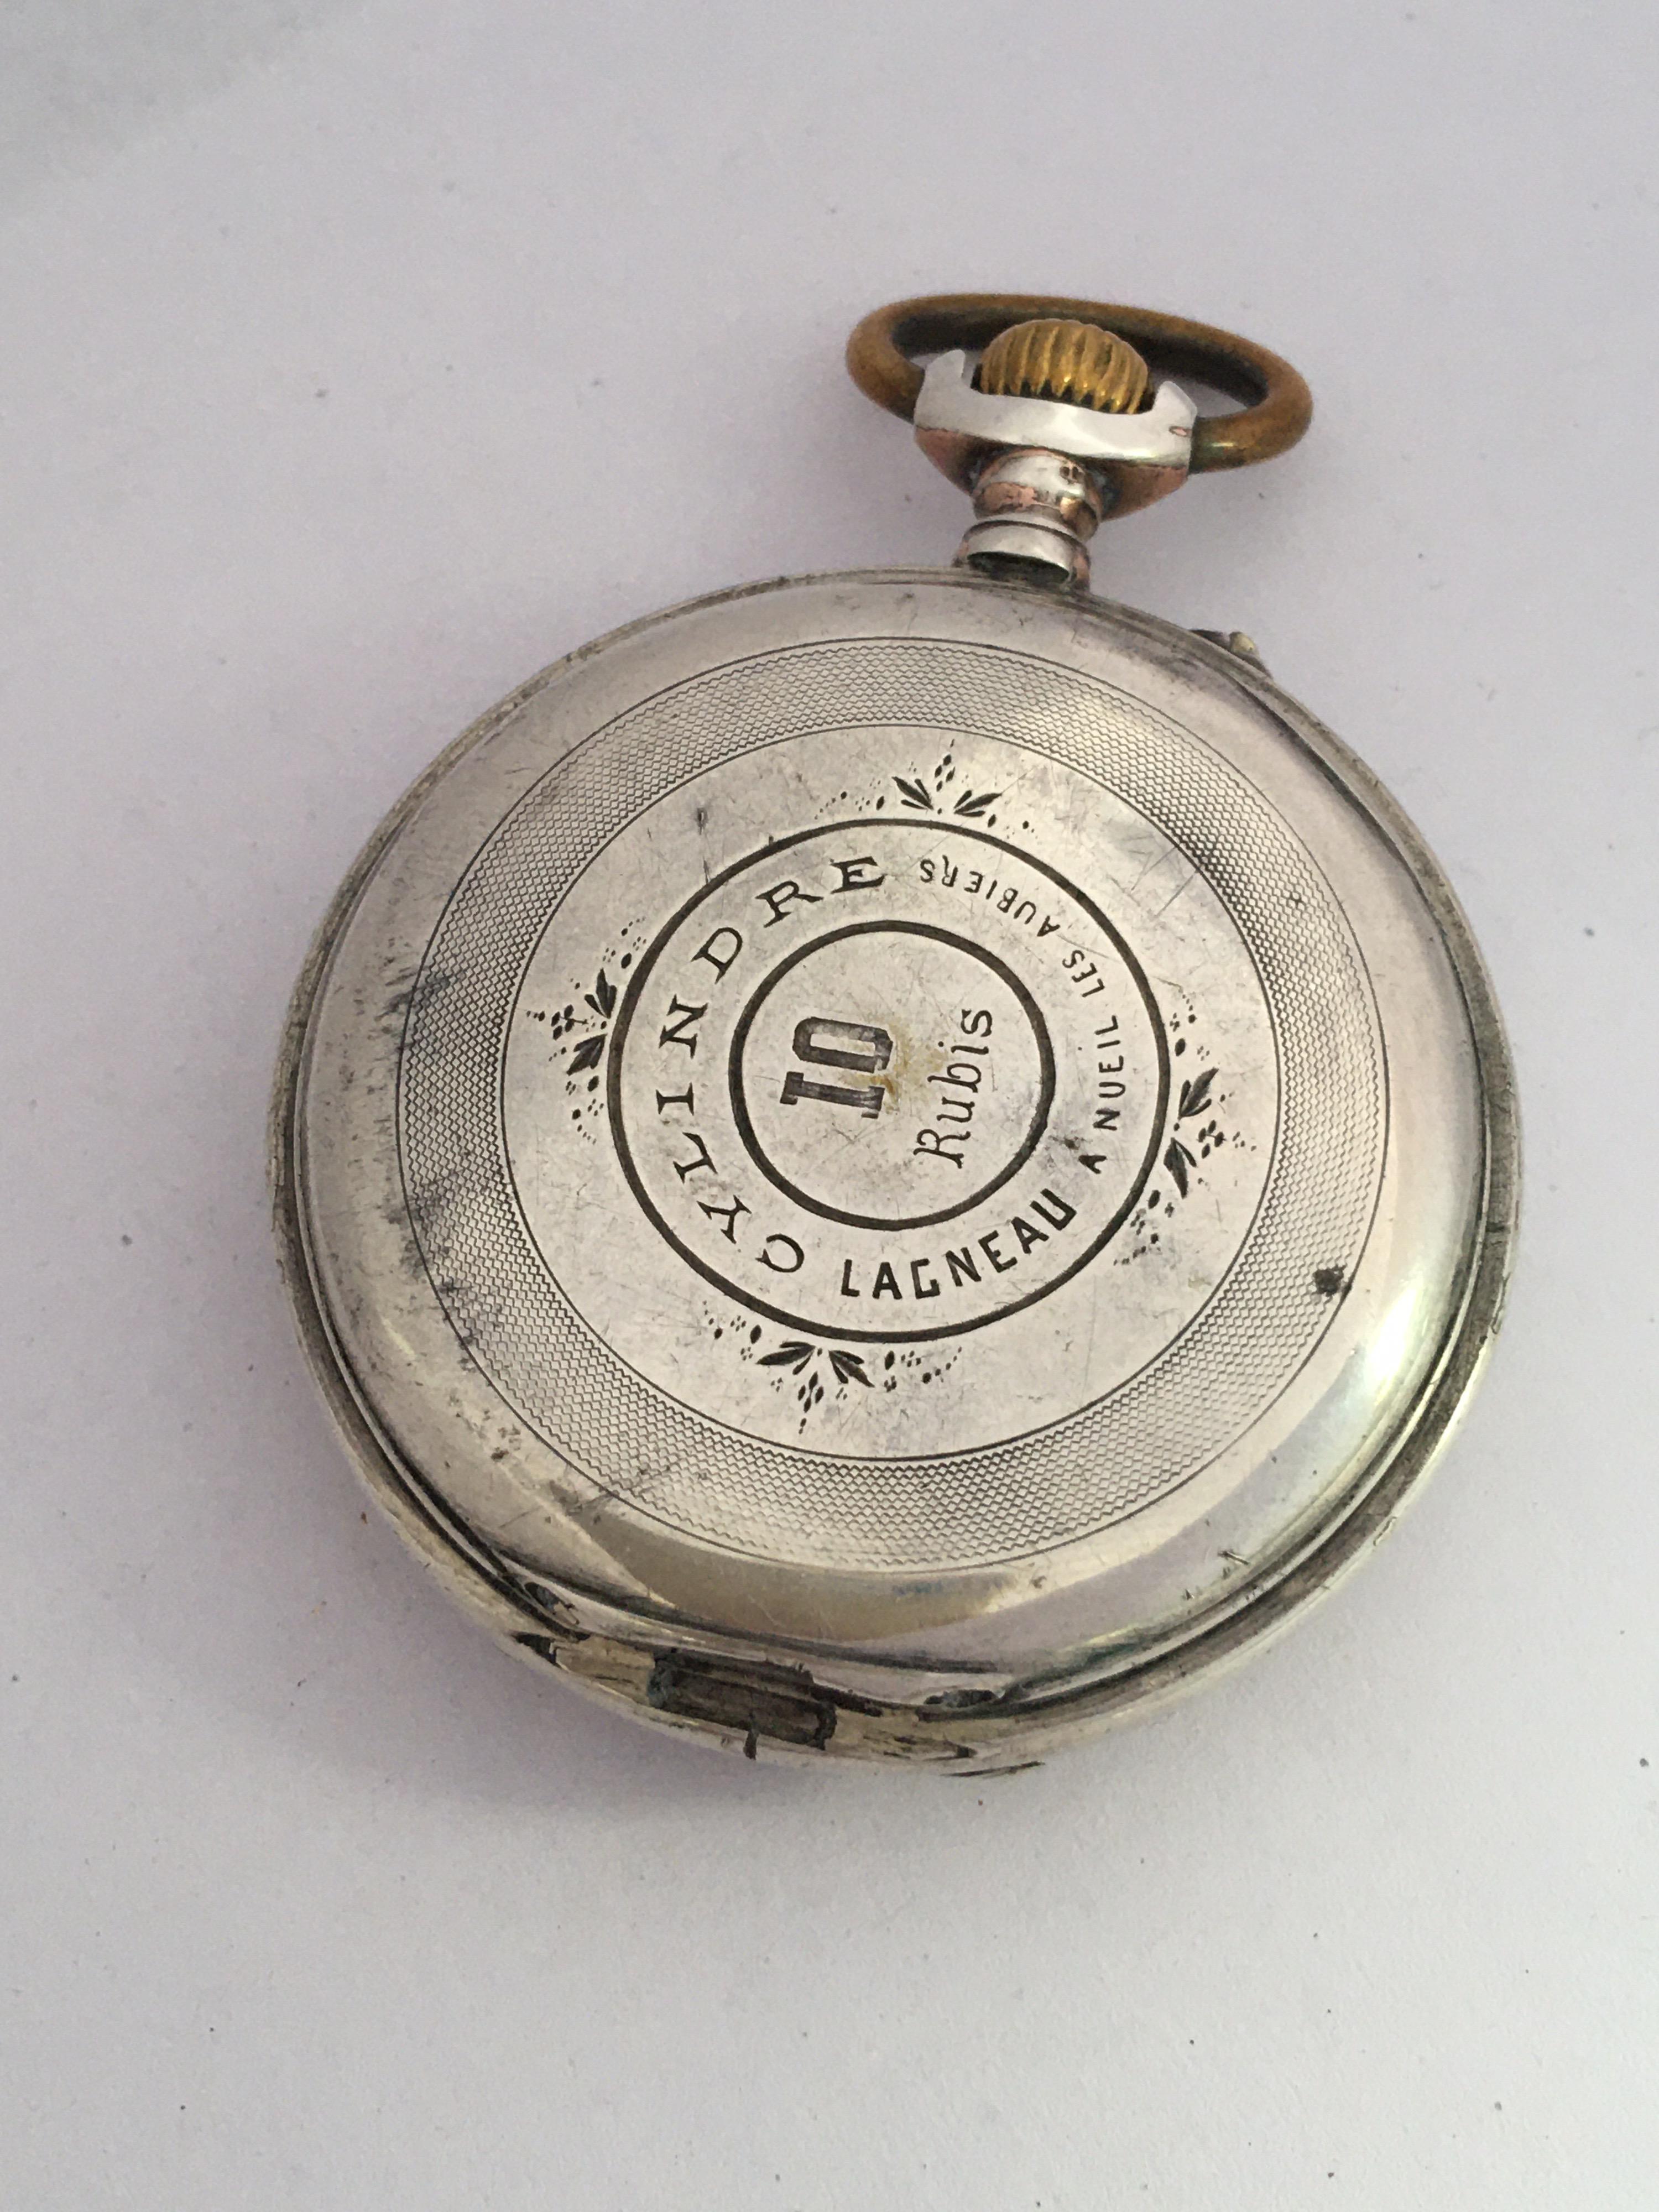 This beautiful antique 48mm diameter hand winding pocket watch is working and  it keeps a good time. Visible signs of ageing and wear with light marks and dents on the watch case as shown. The back cover case is missing as shown.Please study the